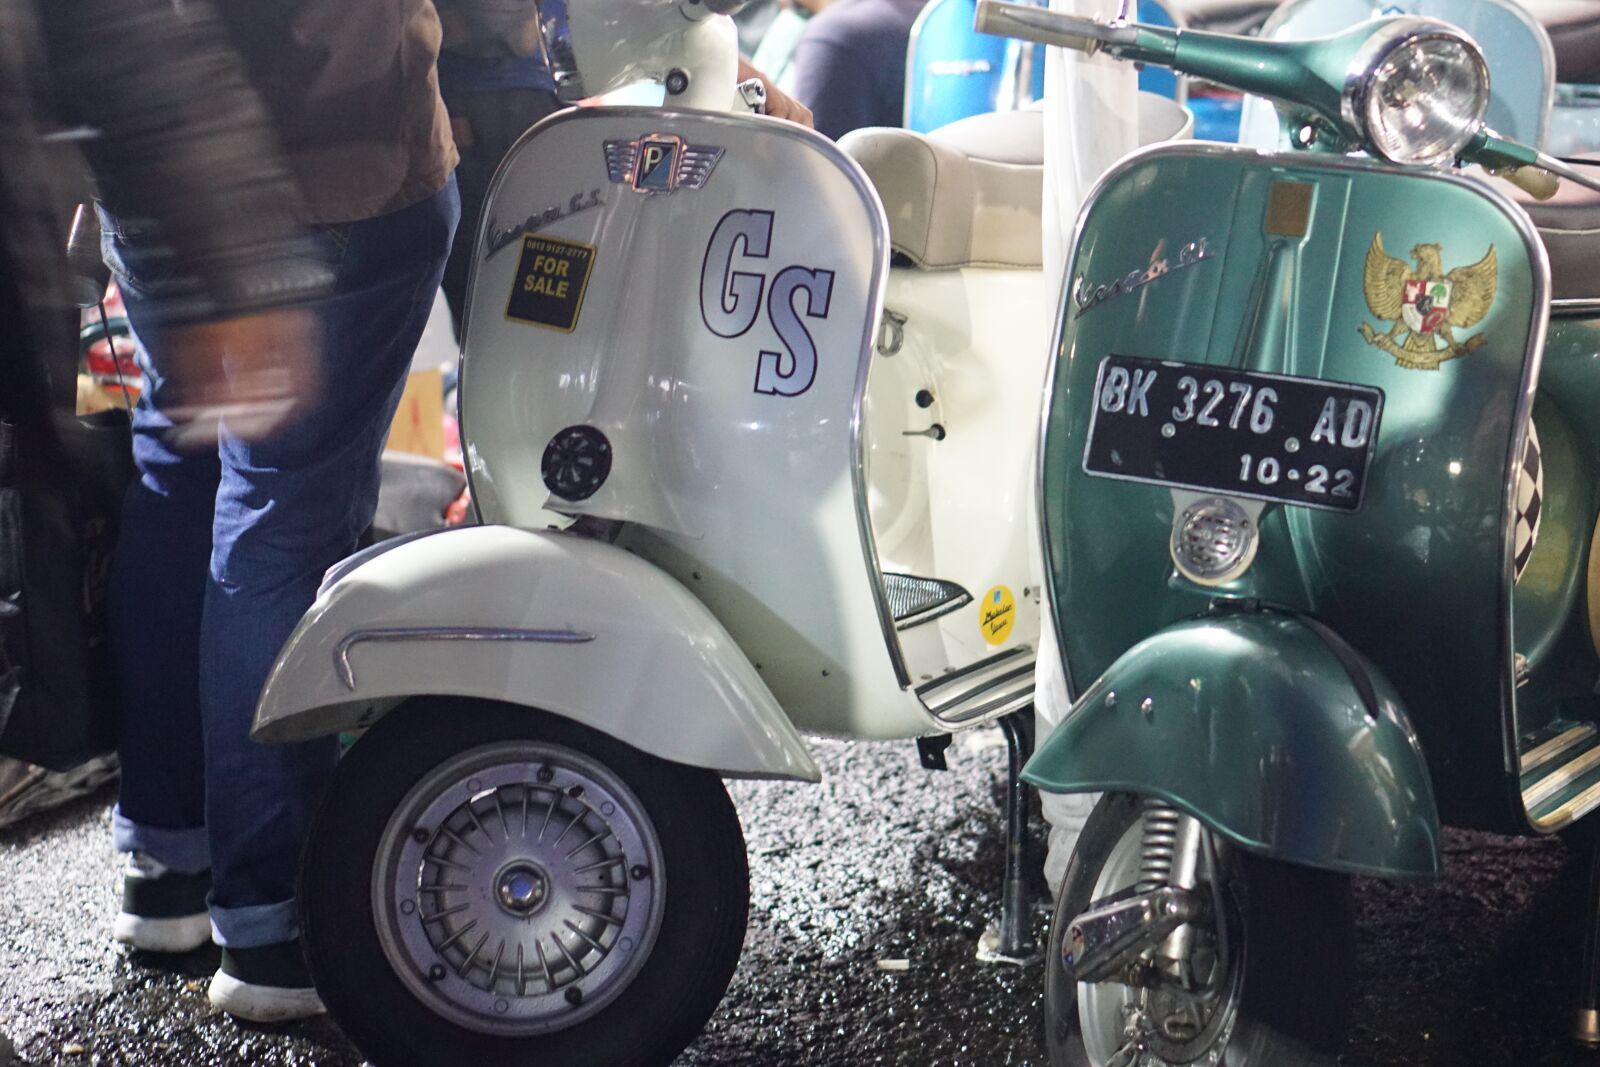 Sony a6000 sample photo. Vespa, wasp, scooter photography